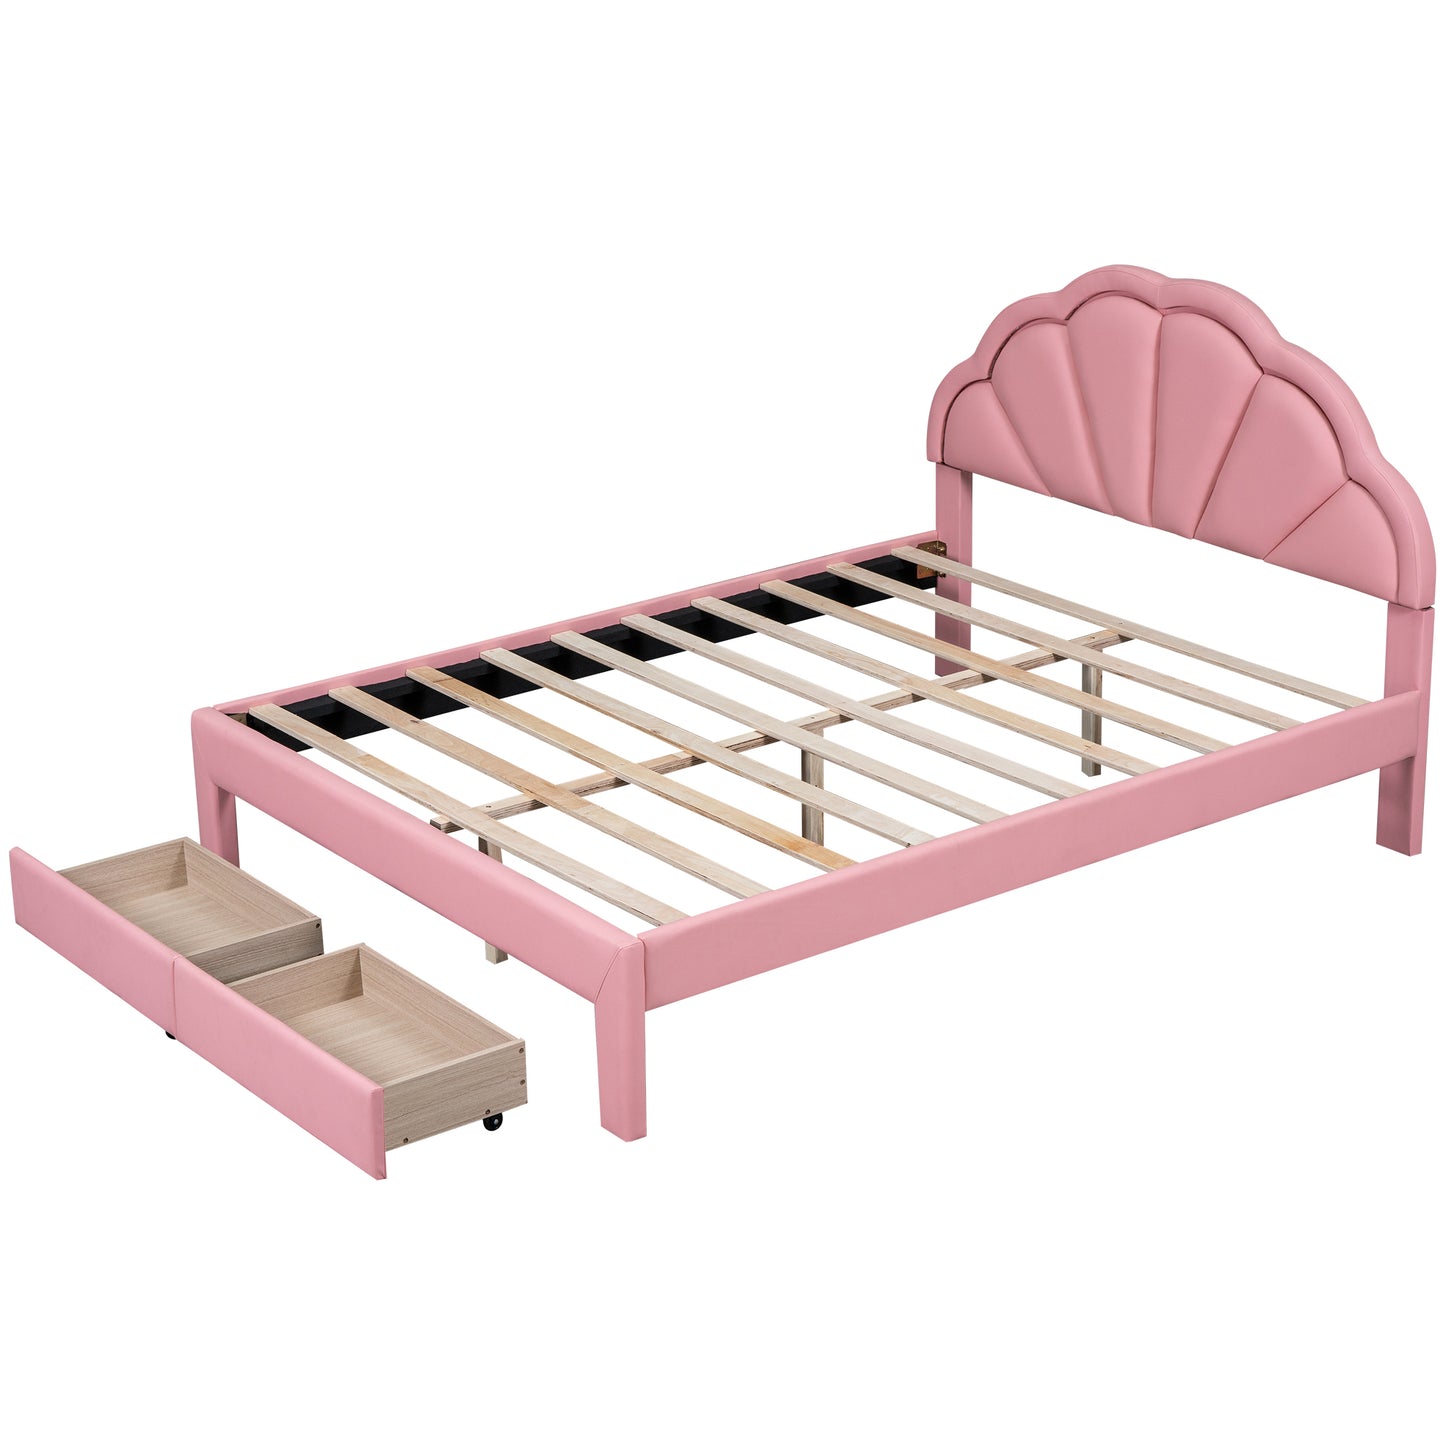 Queen Size Upholstered Platform Bed with Seashell Shaped Headboard, LED and 2 Drawers, Pink